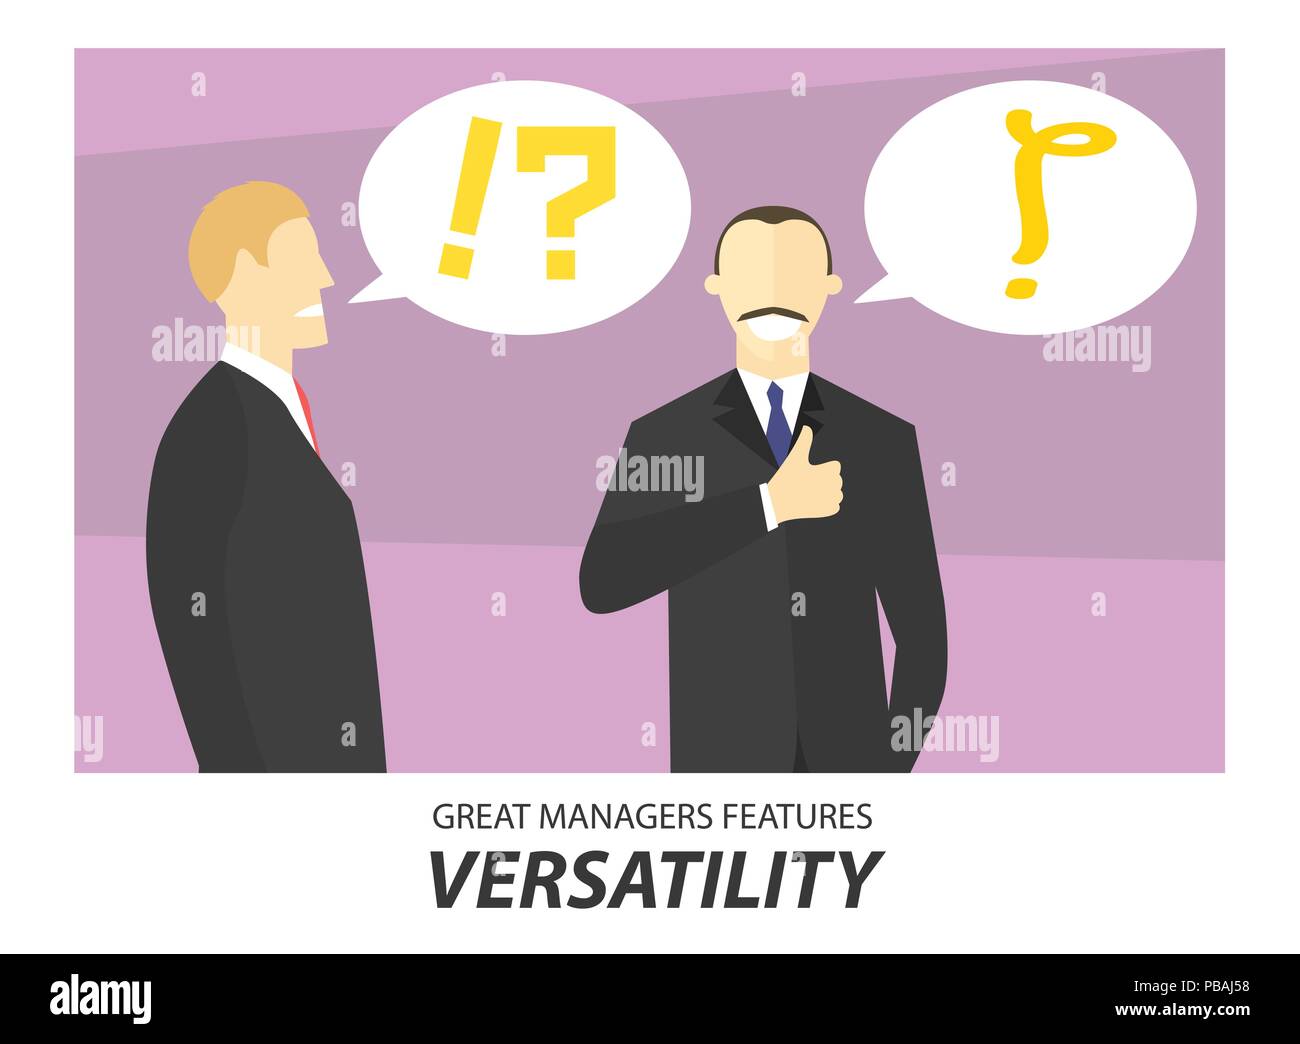 Versatility, great managers features concept illustration. Businessman making decision. Vector image, simply editable Stock Vector